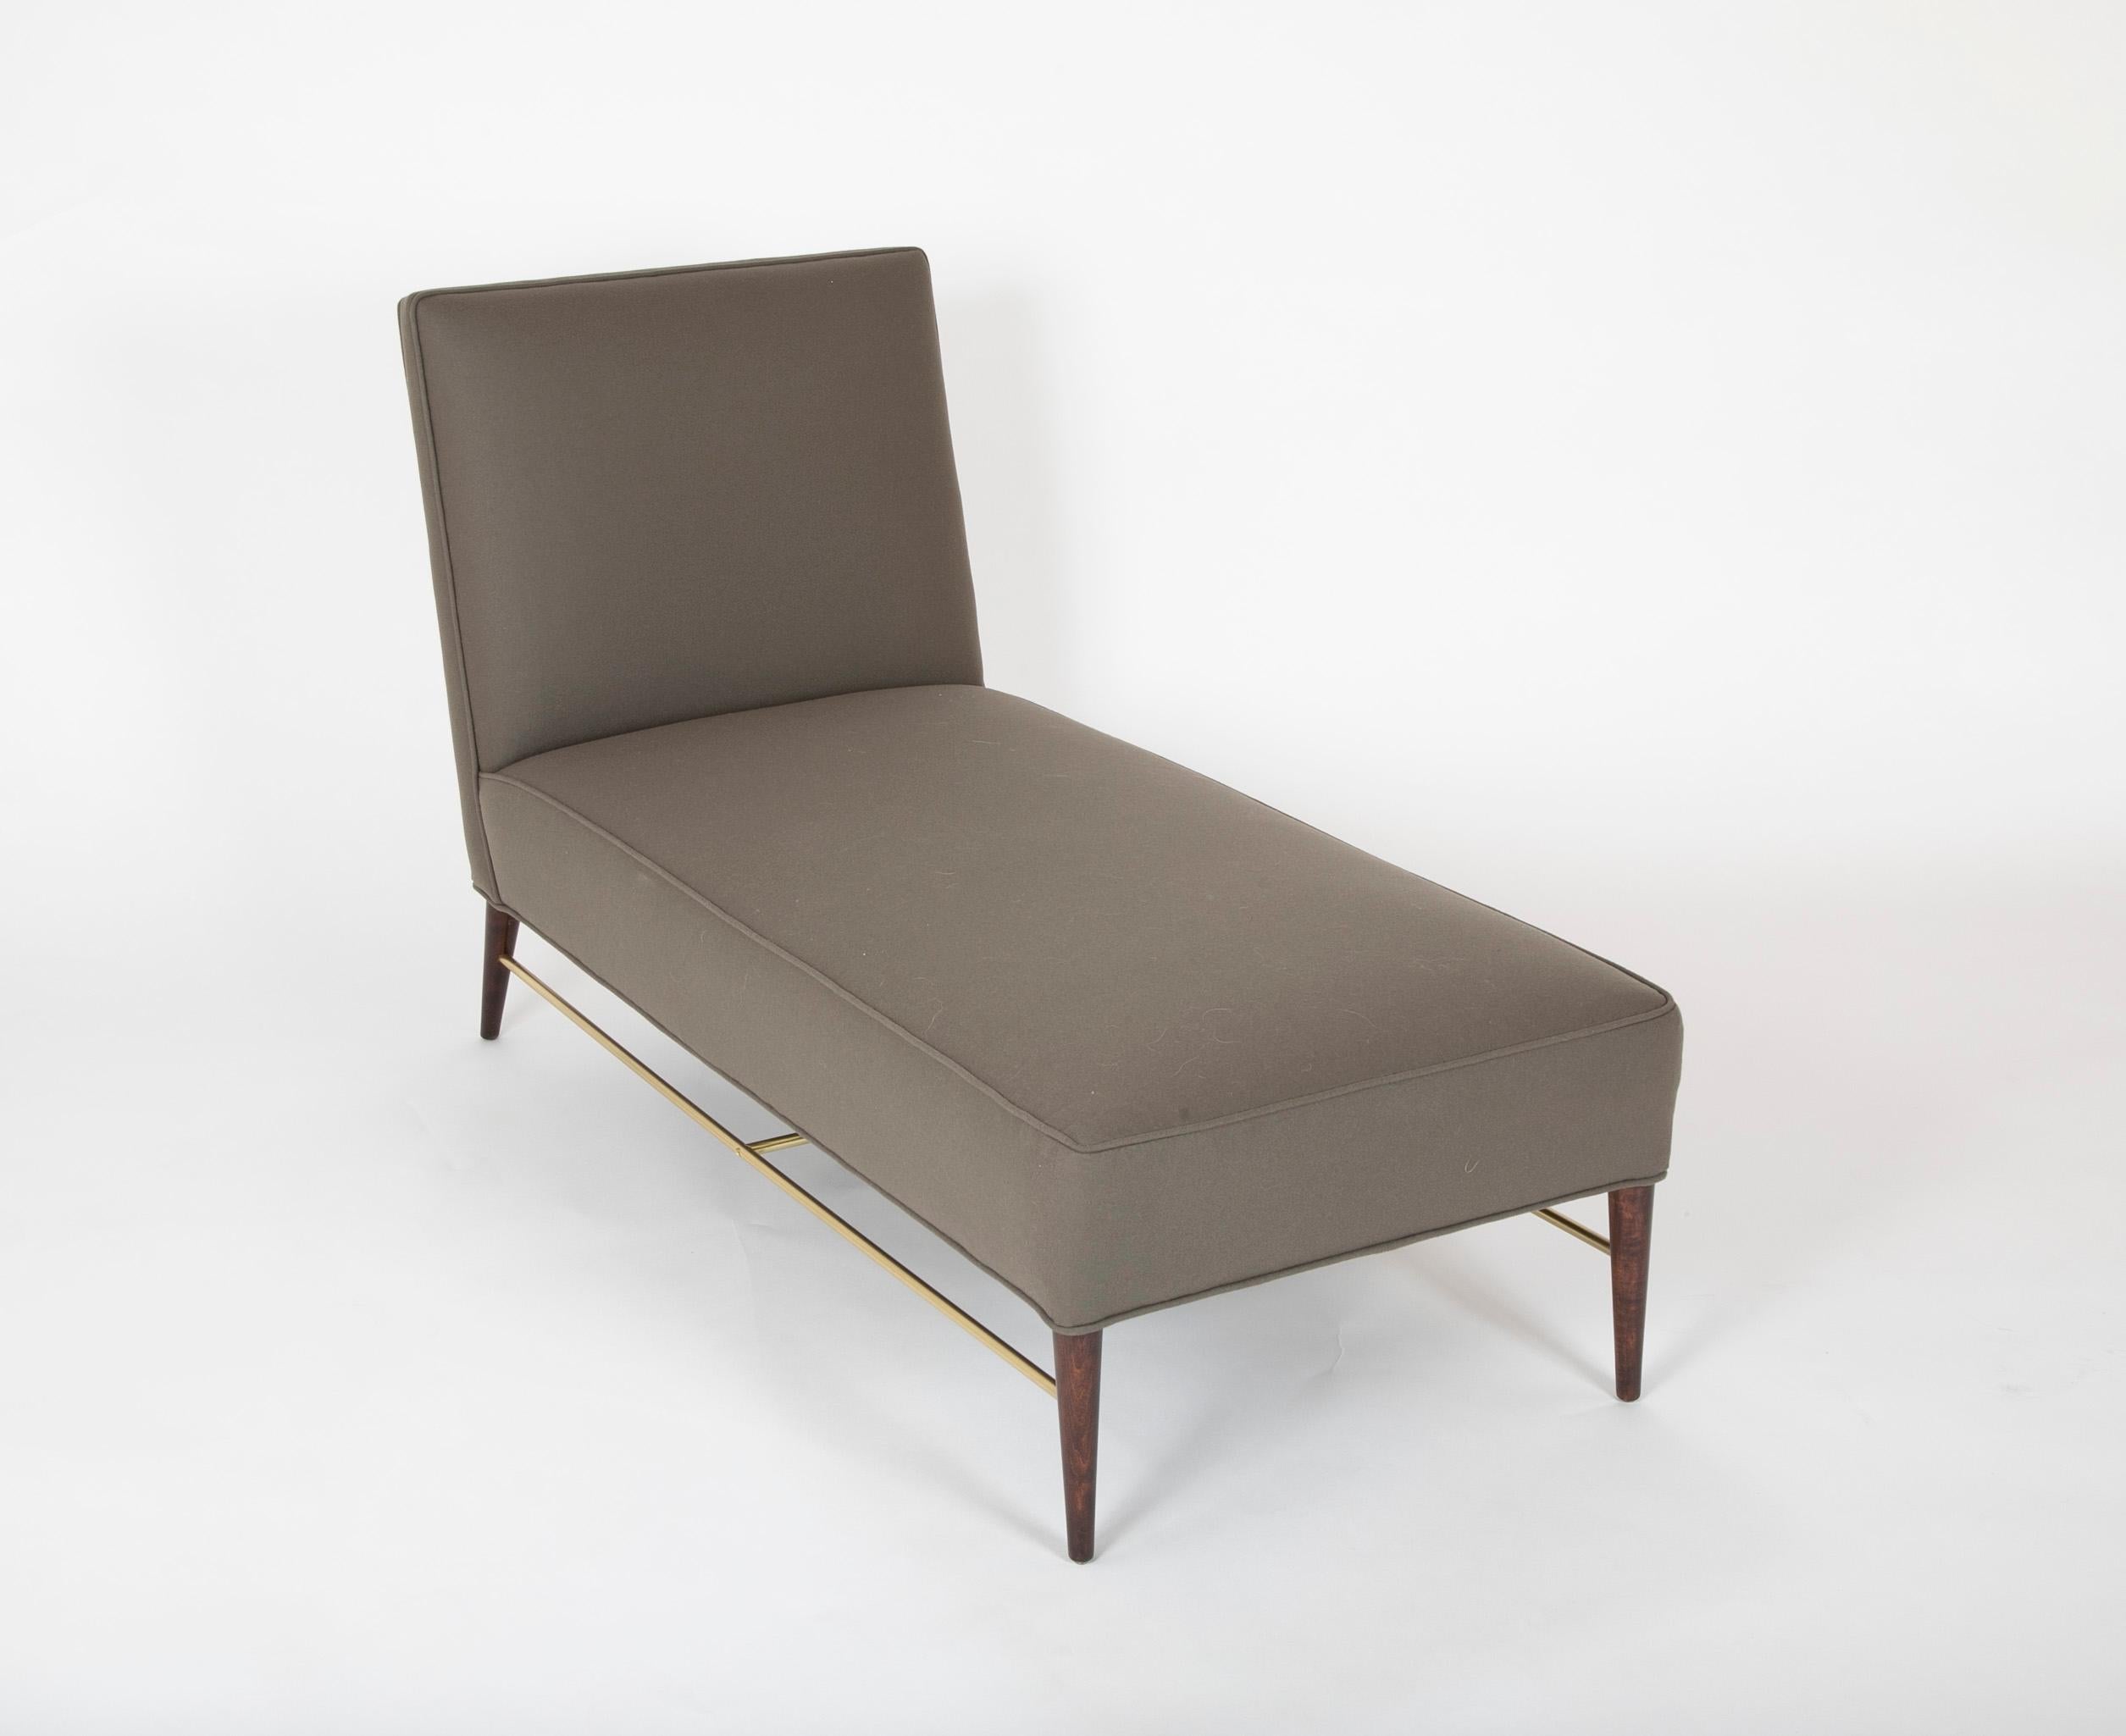 A chaise lounge, model 5018 designed by Paul McCobb for Directional, circa 1955.
upholstered in Rogers & Goffigon Fabric with brass stretcher and lacquered wood legs. 

Literature: Directional Designs: Paul McCobb, manufacturer's catalog, pg. 80.